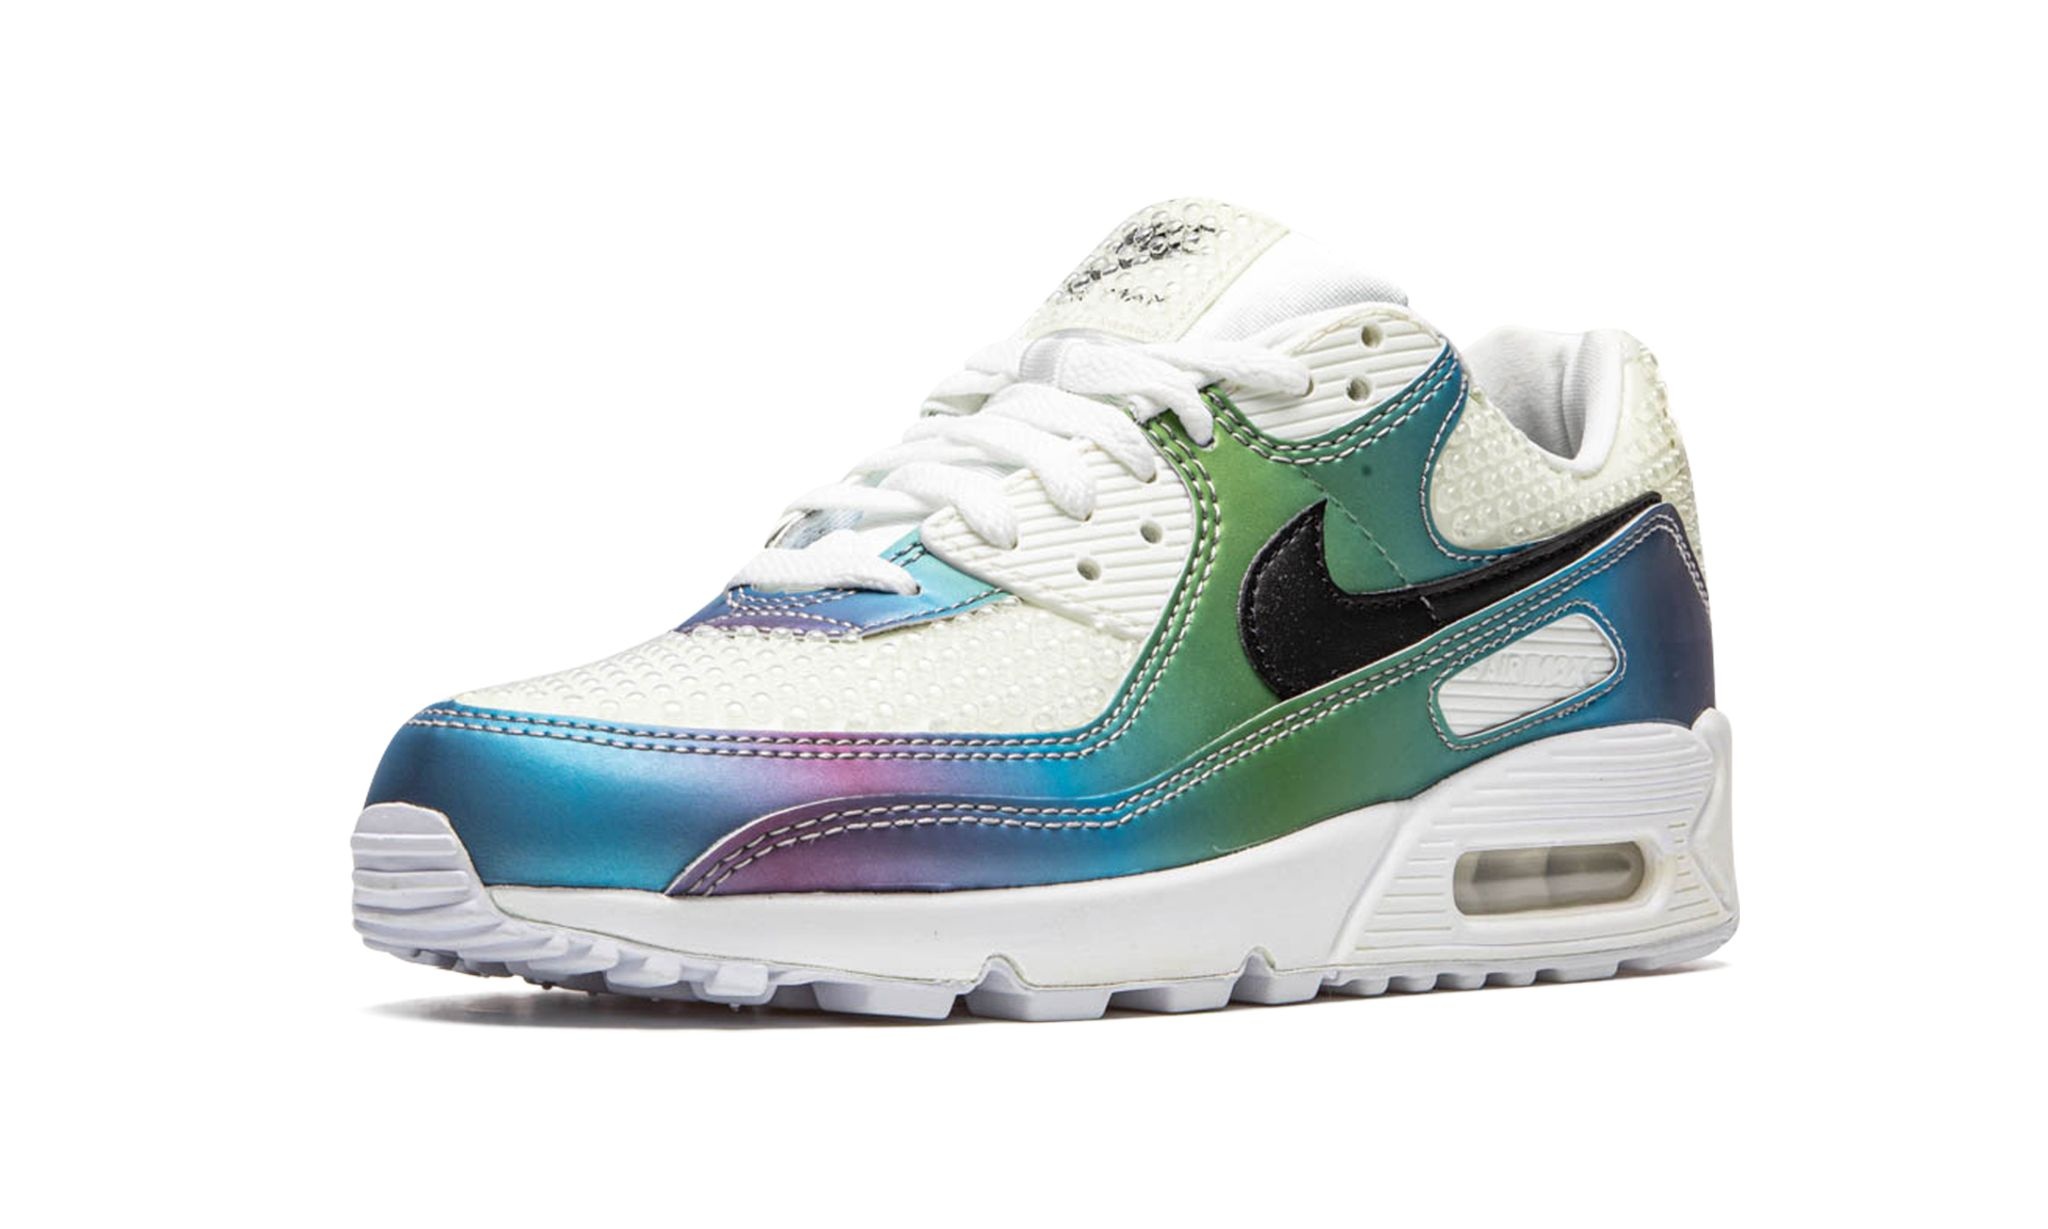 Air Max 90 "Bubble Pack" - 4